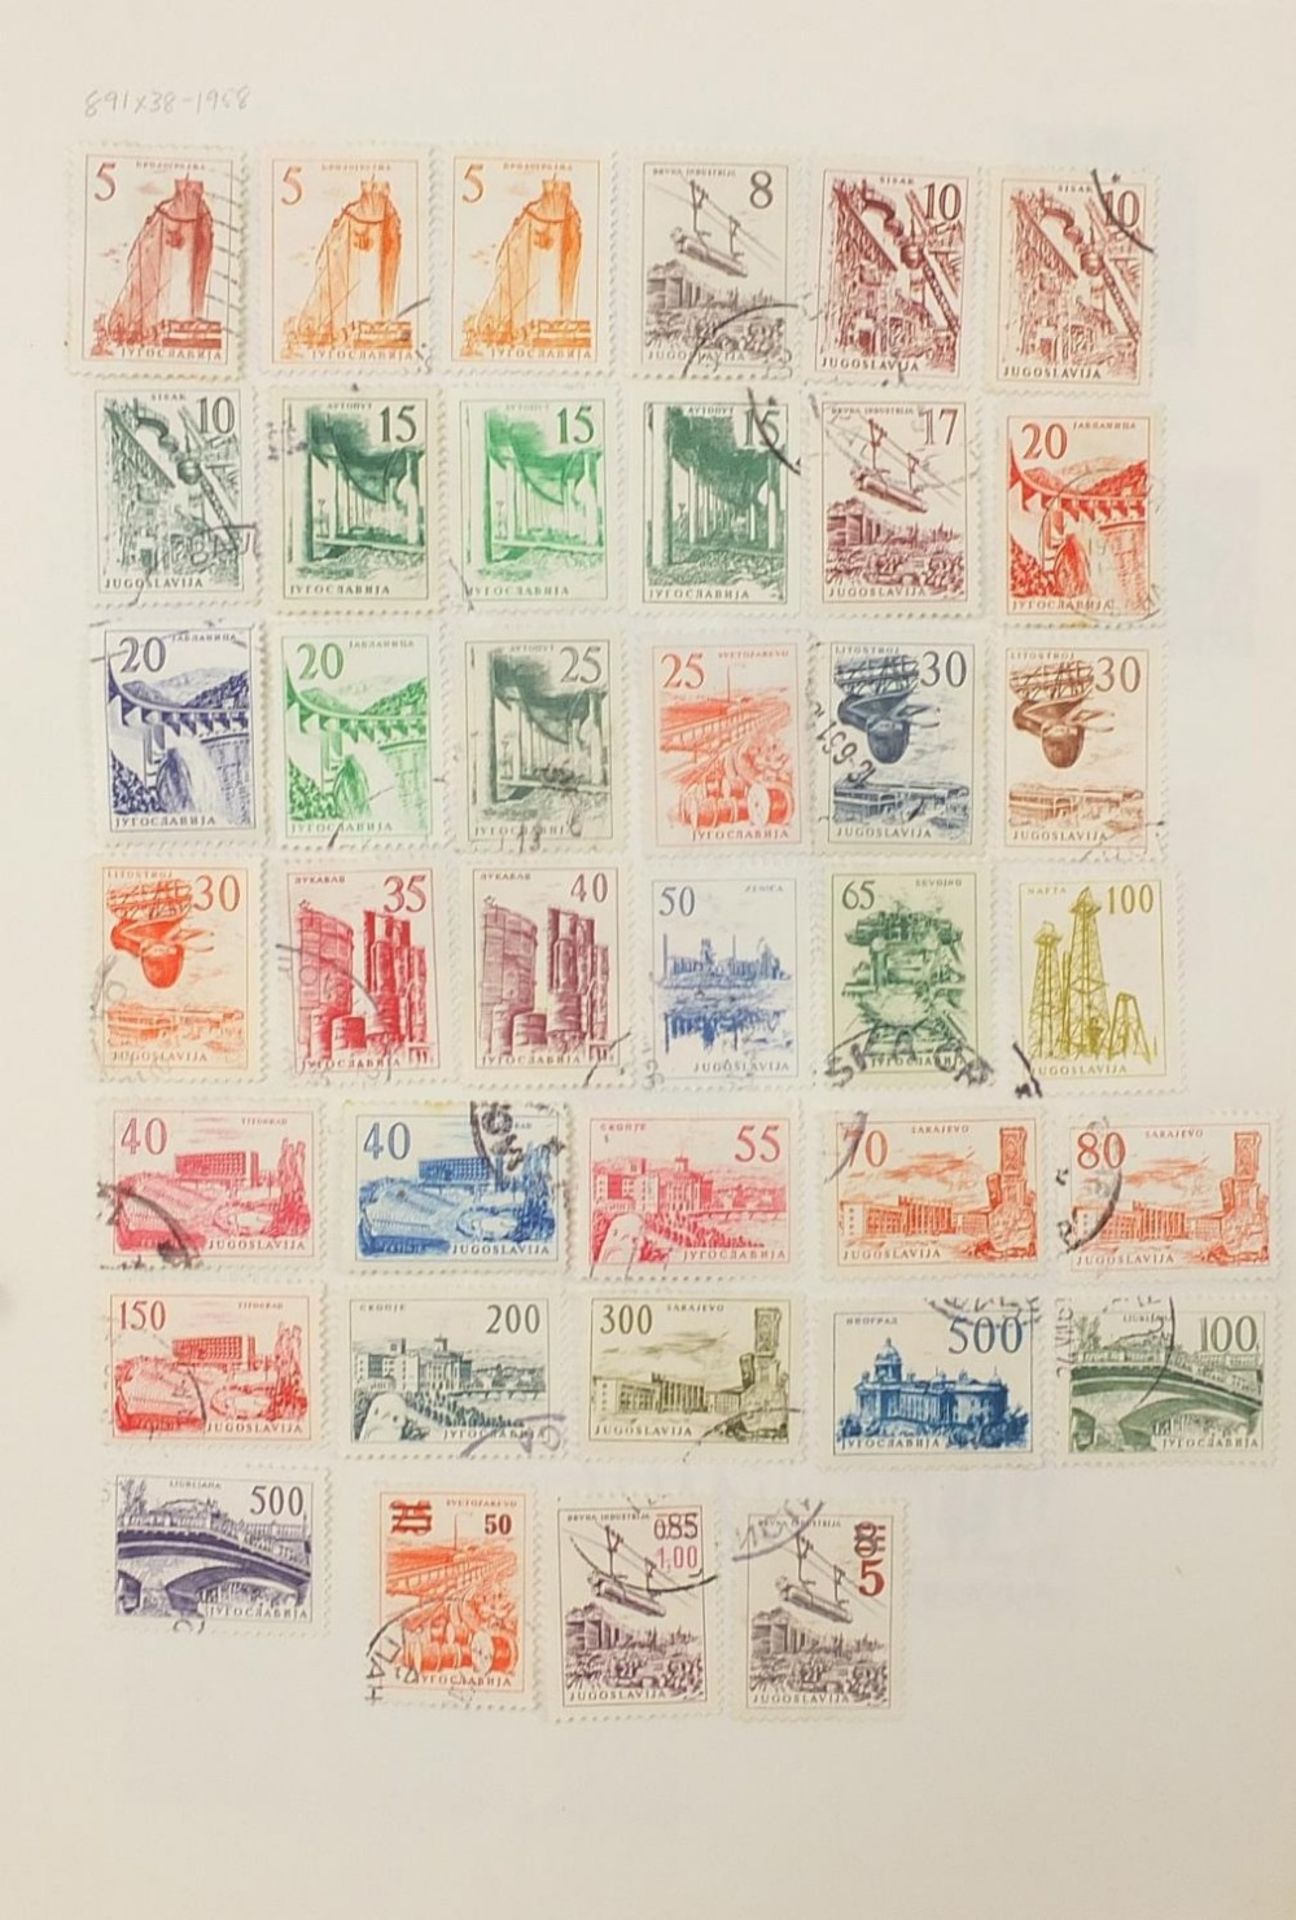 Extensive collection of antique and later world stamps arranged in albums including Brazil, - Image 40 of 52